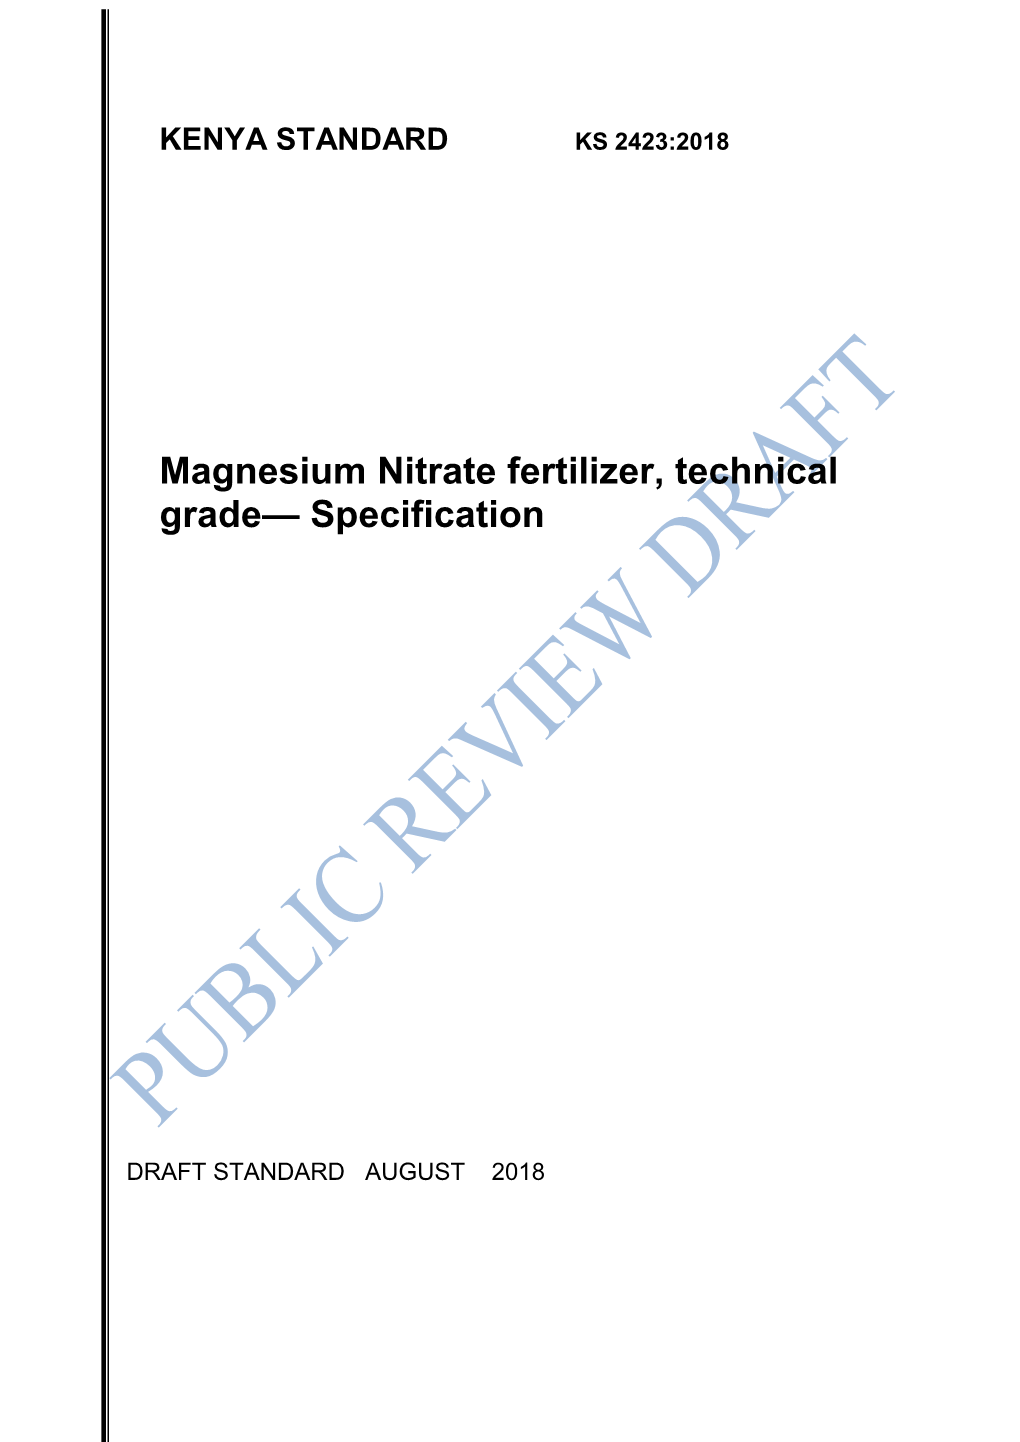 Magnesium Nitrate Fertilizer, Technical Grade— Specification